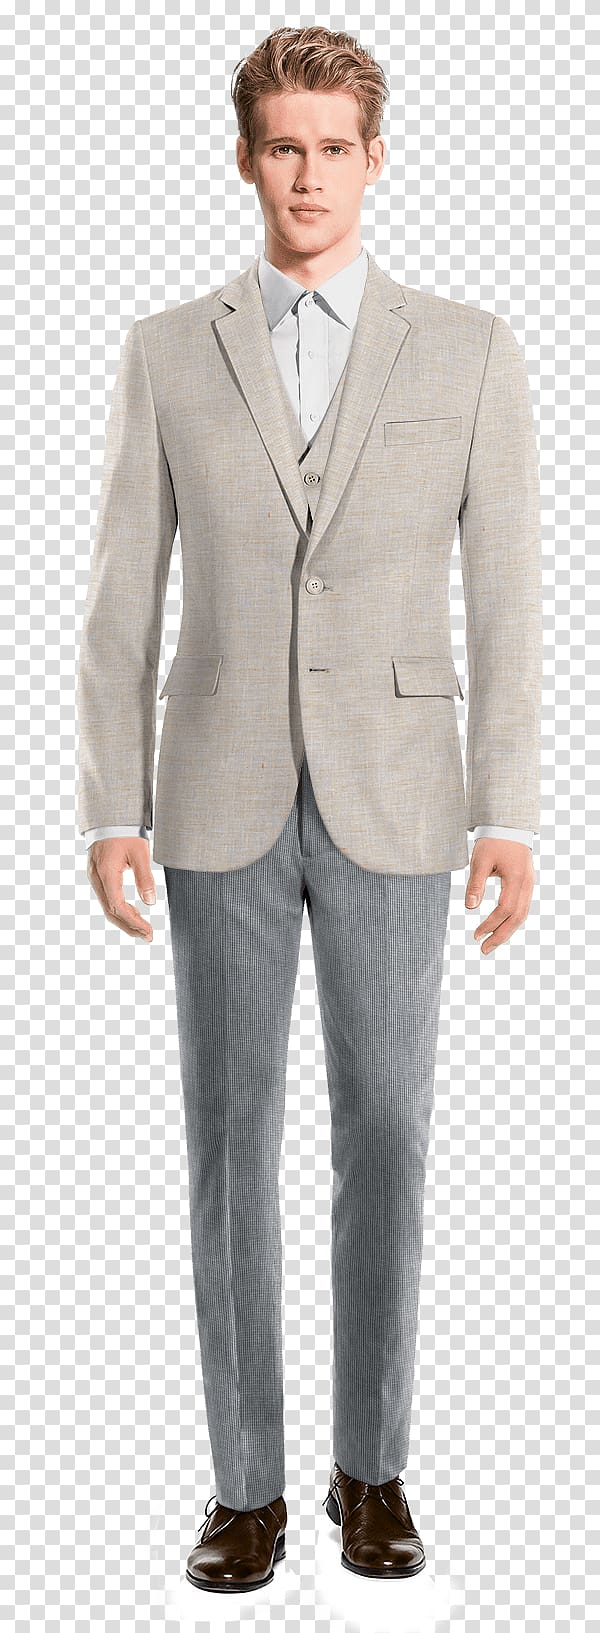 Suit Chino cloth Pants Tweed Shoe, costume homme transparent background PNG clipart